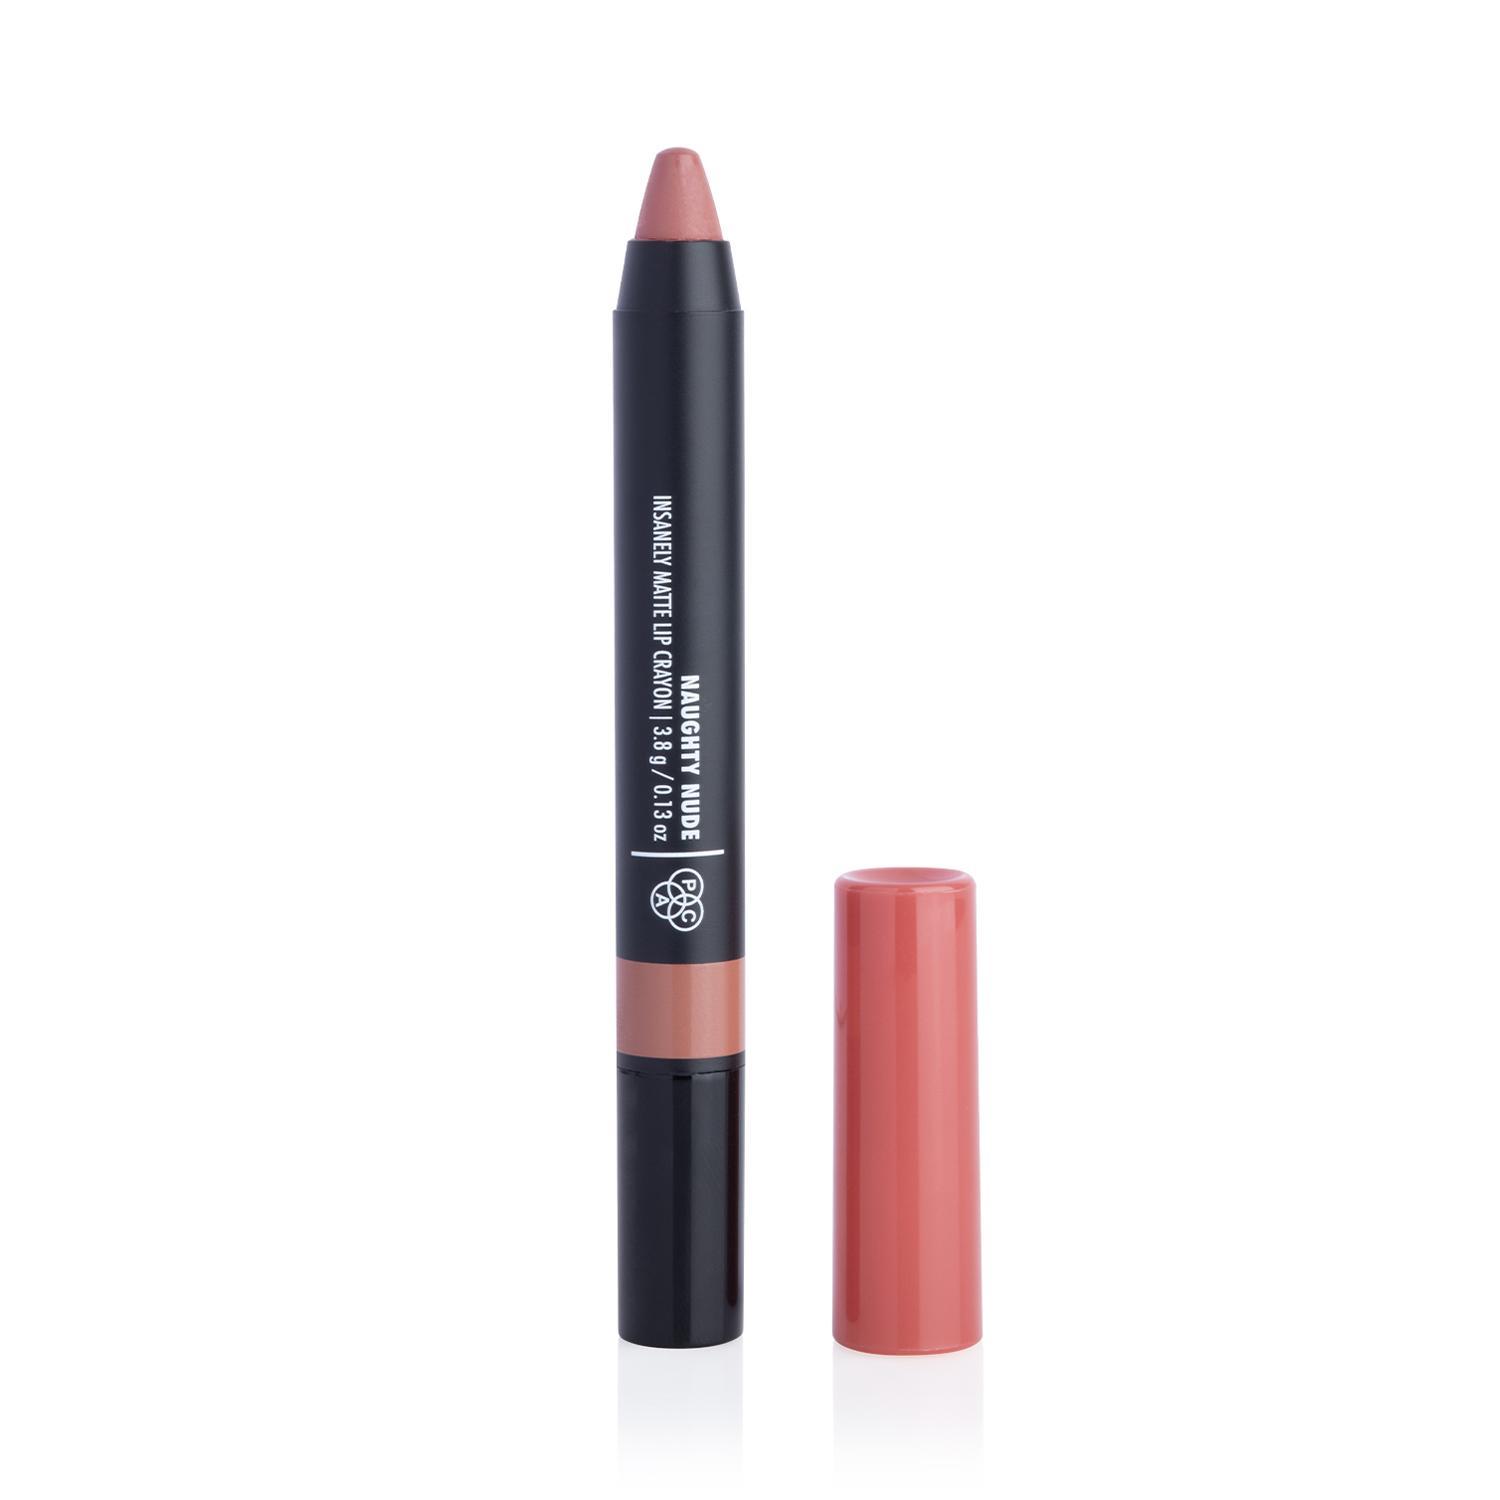 pac insanely matte lip crayon - naughty nude (3.8g)